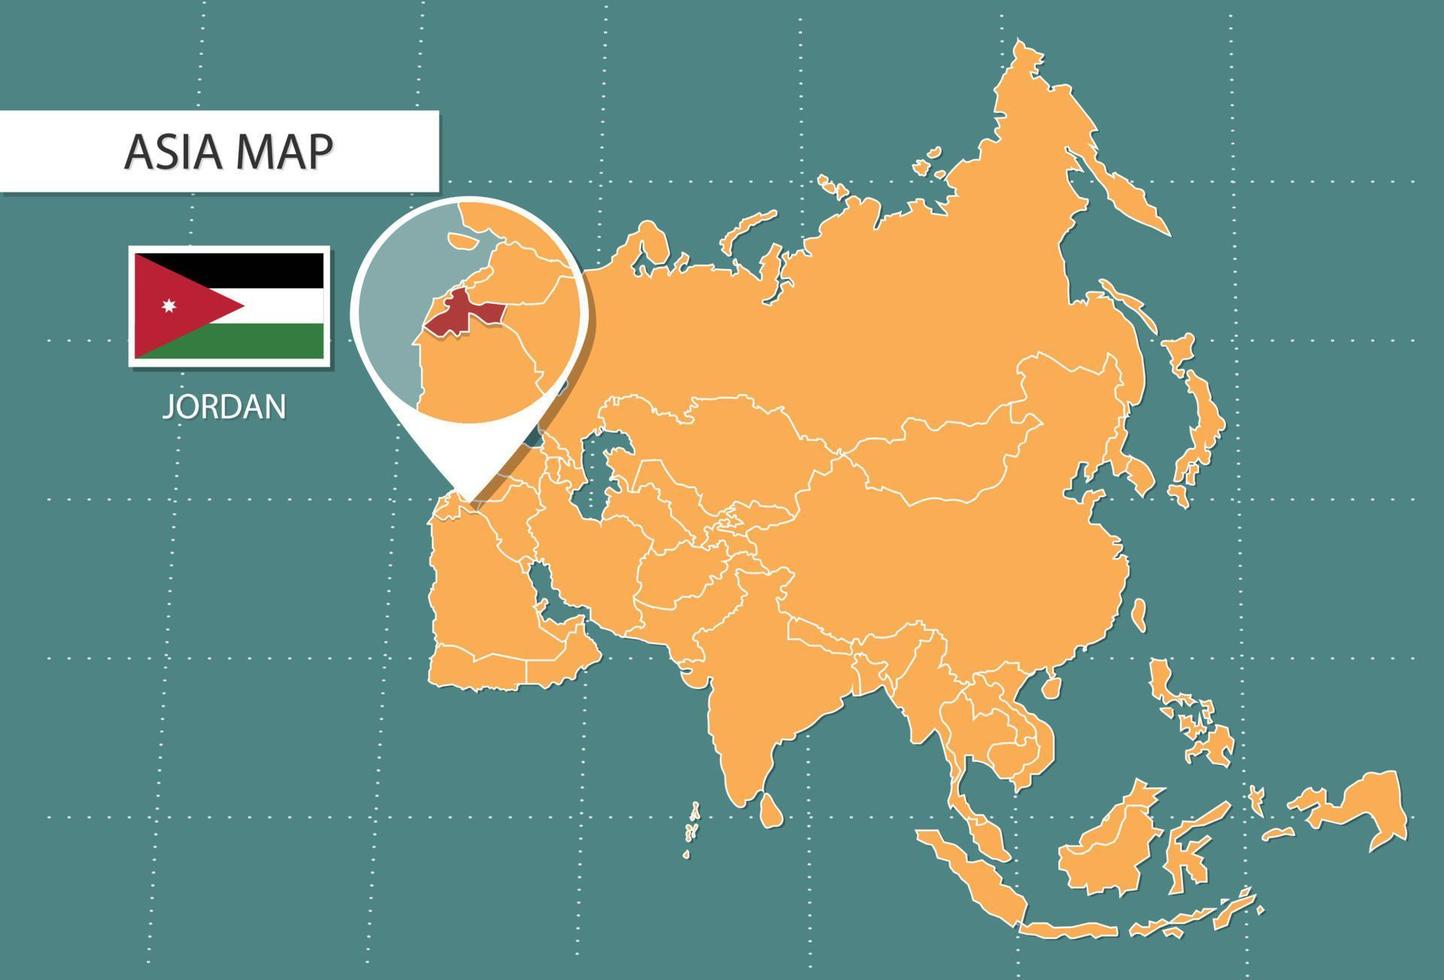 Jordan map in Asia zoom version, icons showing Jordan location and flags. vector